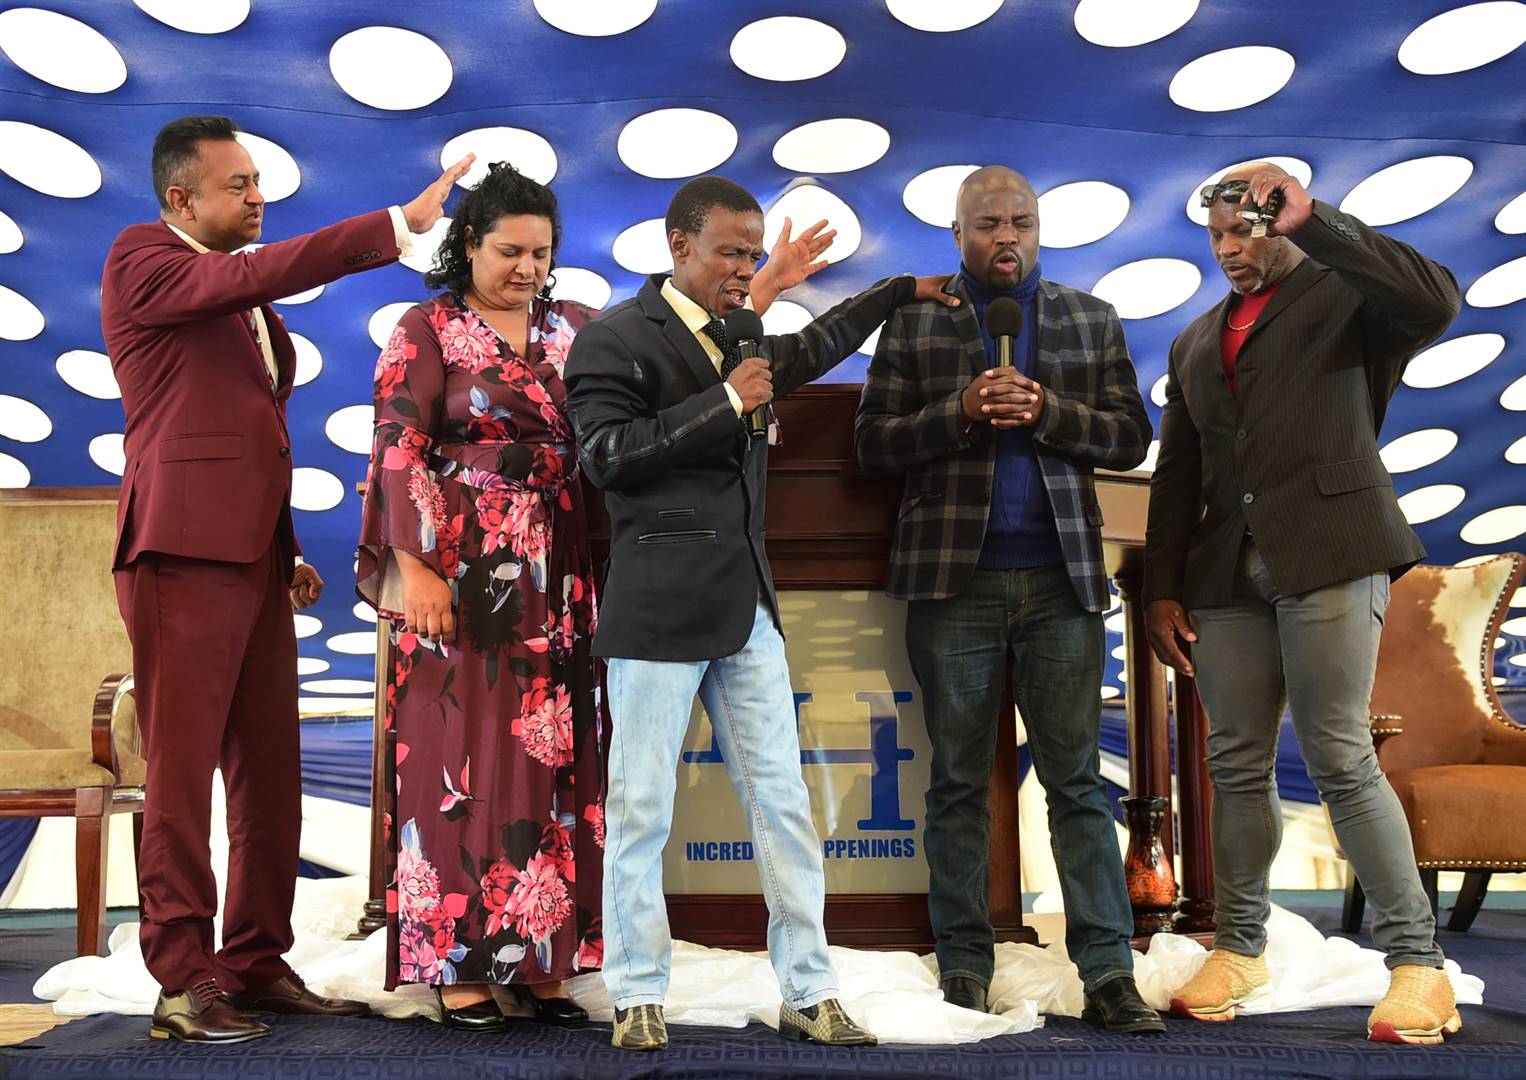 From left: Pastor Jeff Naidoo and his wife Cookie, with Pastor Paseka ‘Mboro’ Motsoeneng, Pastor Enoch Phiri and Mandoza’s former bodyguard, Smodern ‘Batista’ Dzimba, praying together to overcome hurdles such as depression and poverty.   Photo by Morapedi Mashashe